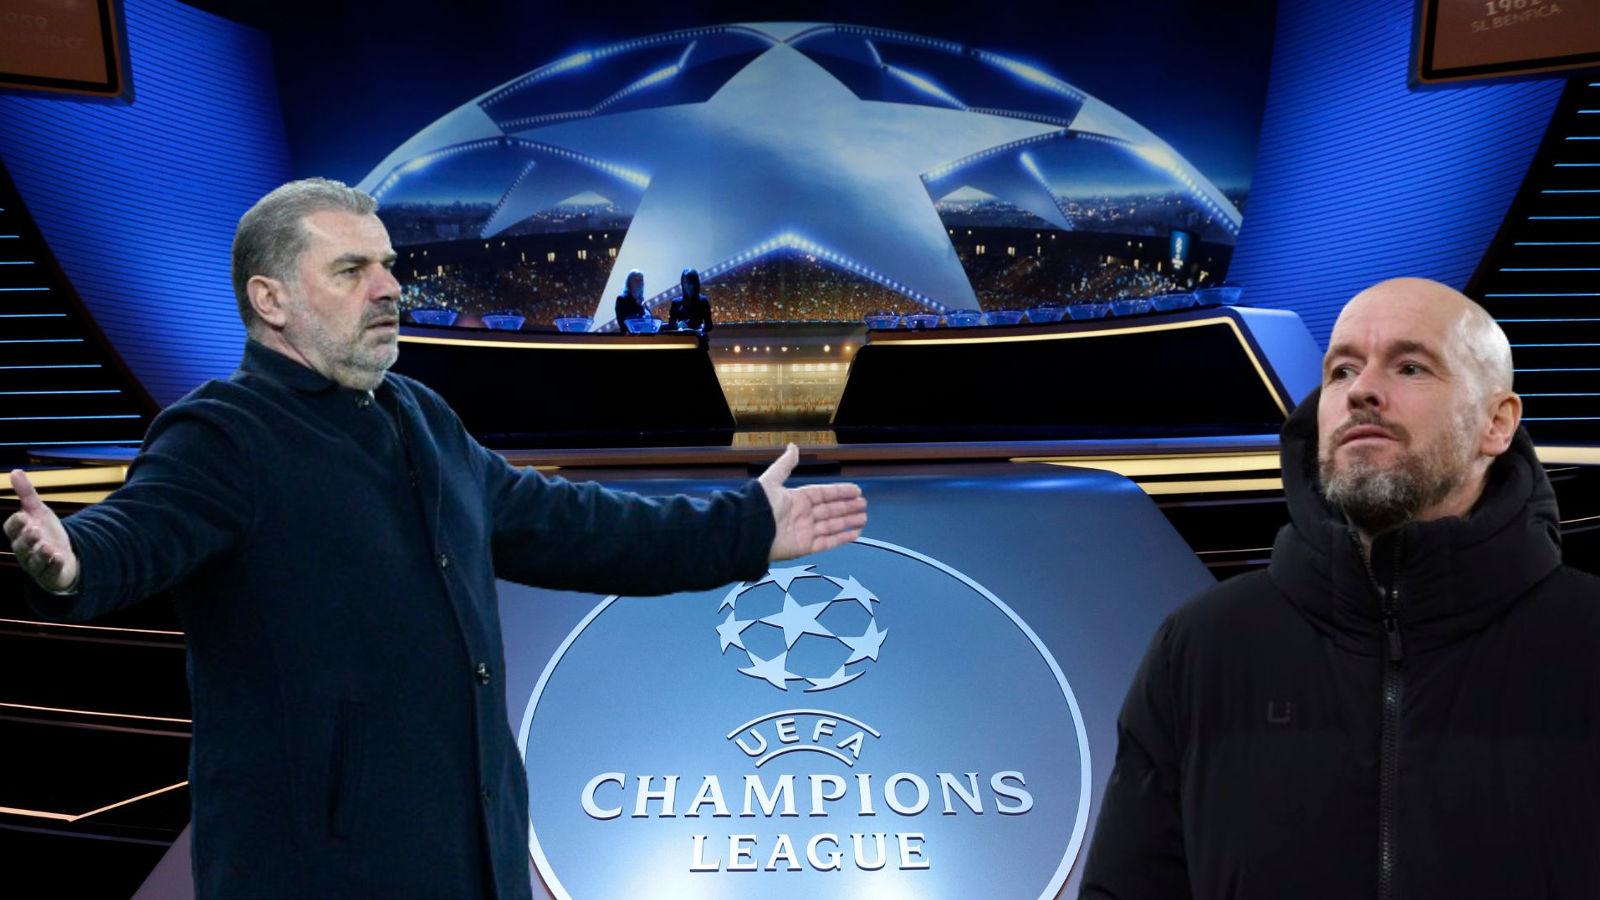 Ange Postecoglou and Erik ten Hag look on at the Champions League draw being made